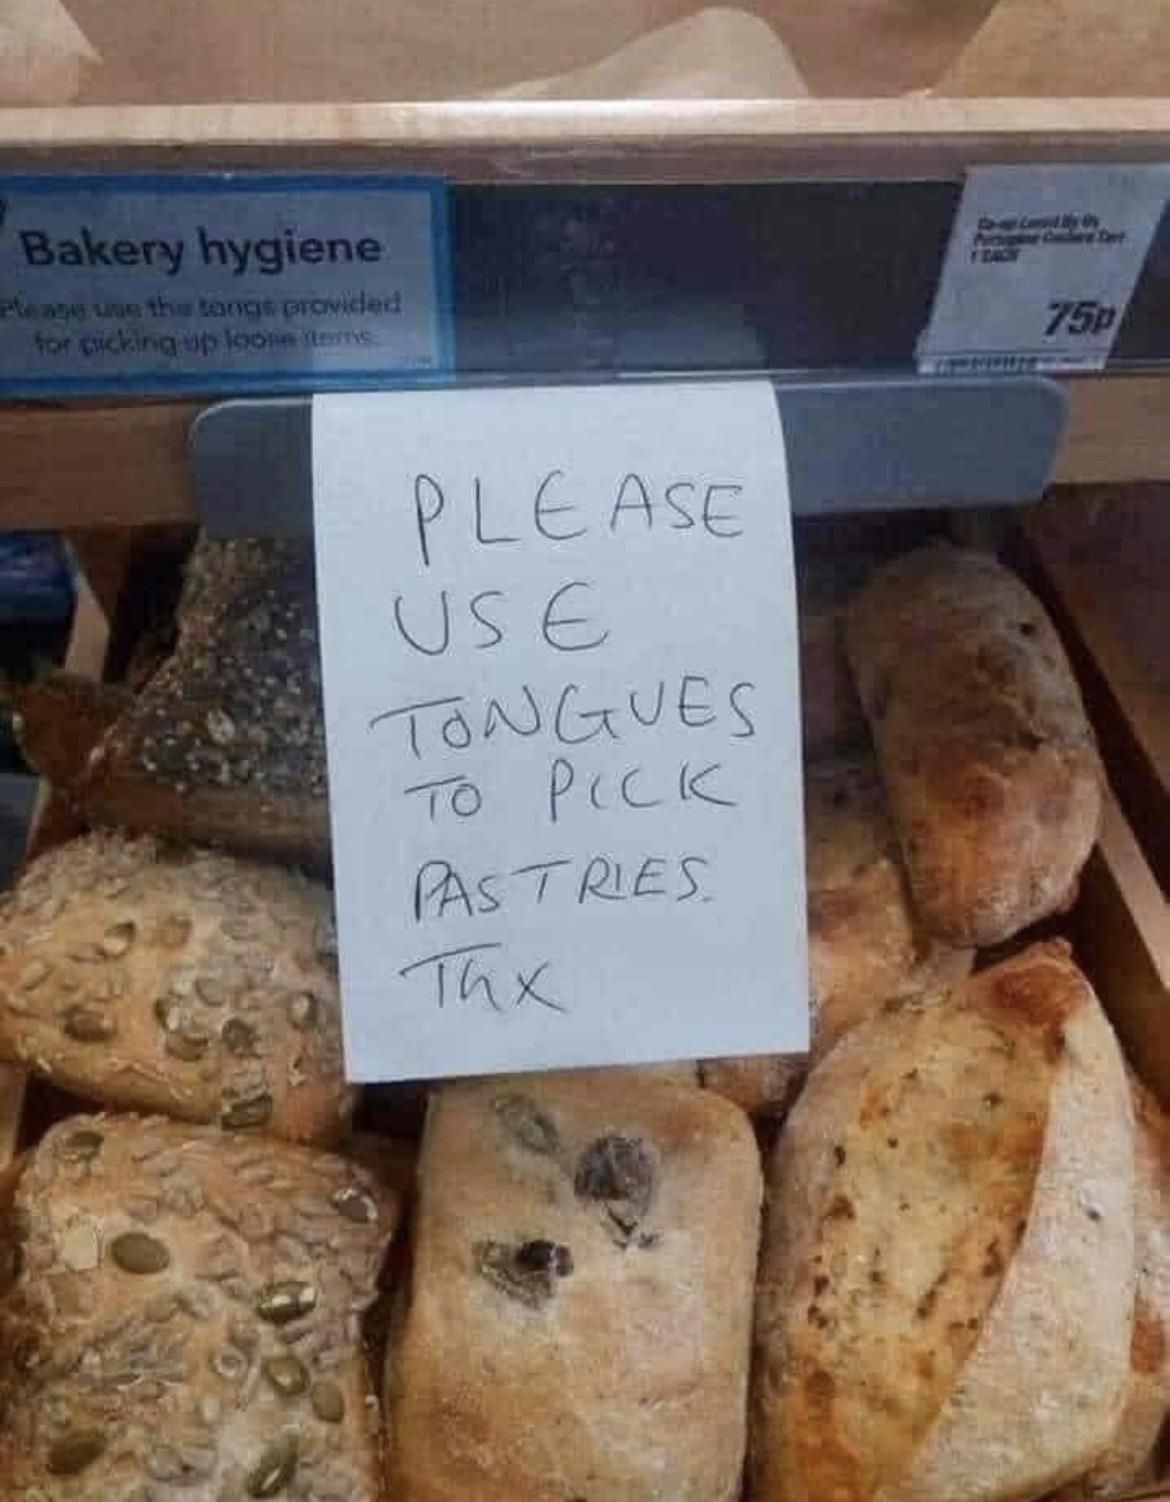 It's getting kinky at your local bakeries